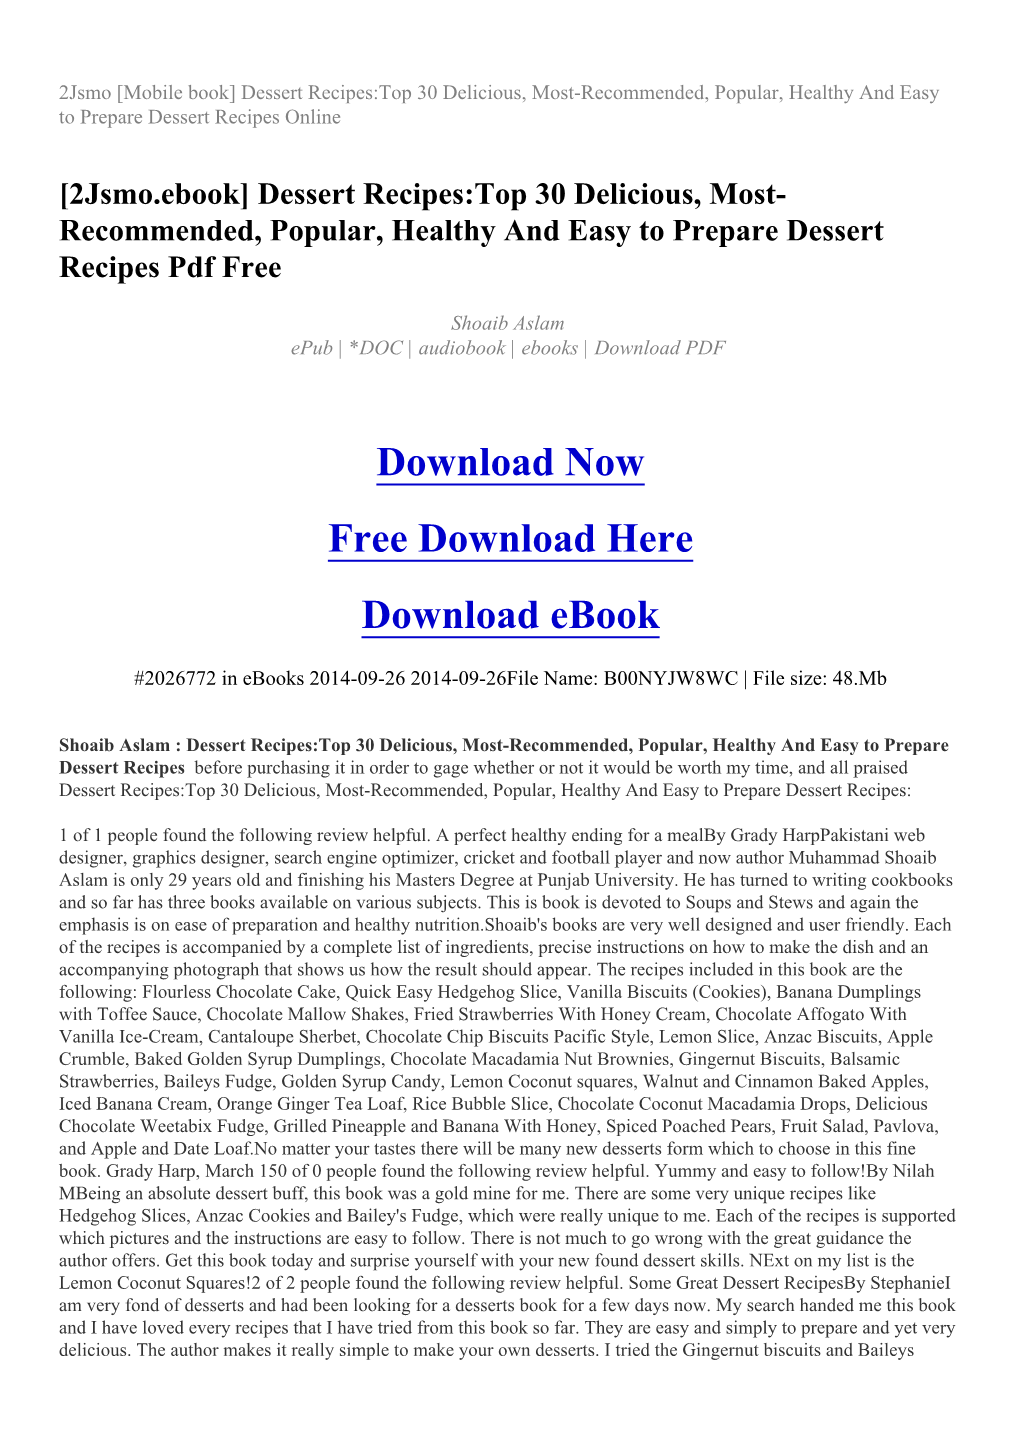 Recommended, Popular, Healthy and Easy to Prepare Dessert Recipes Online